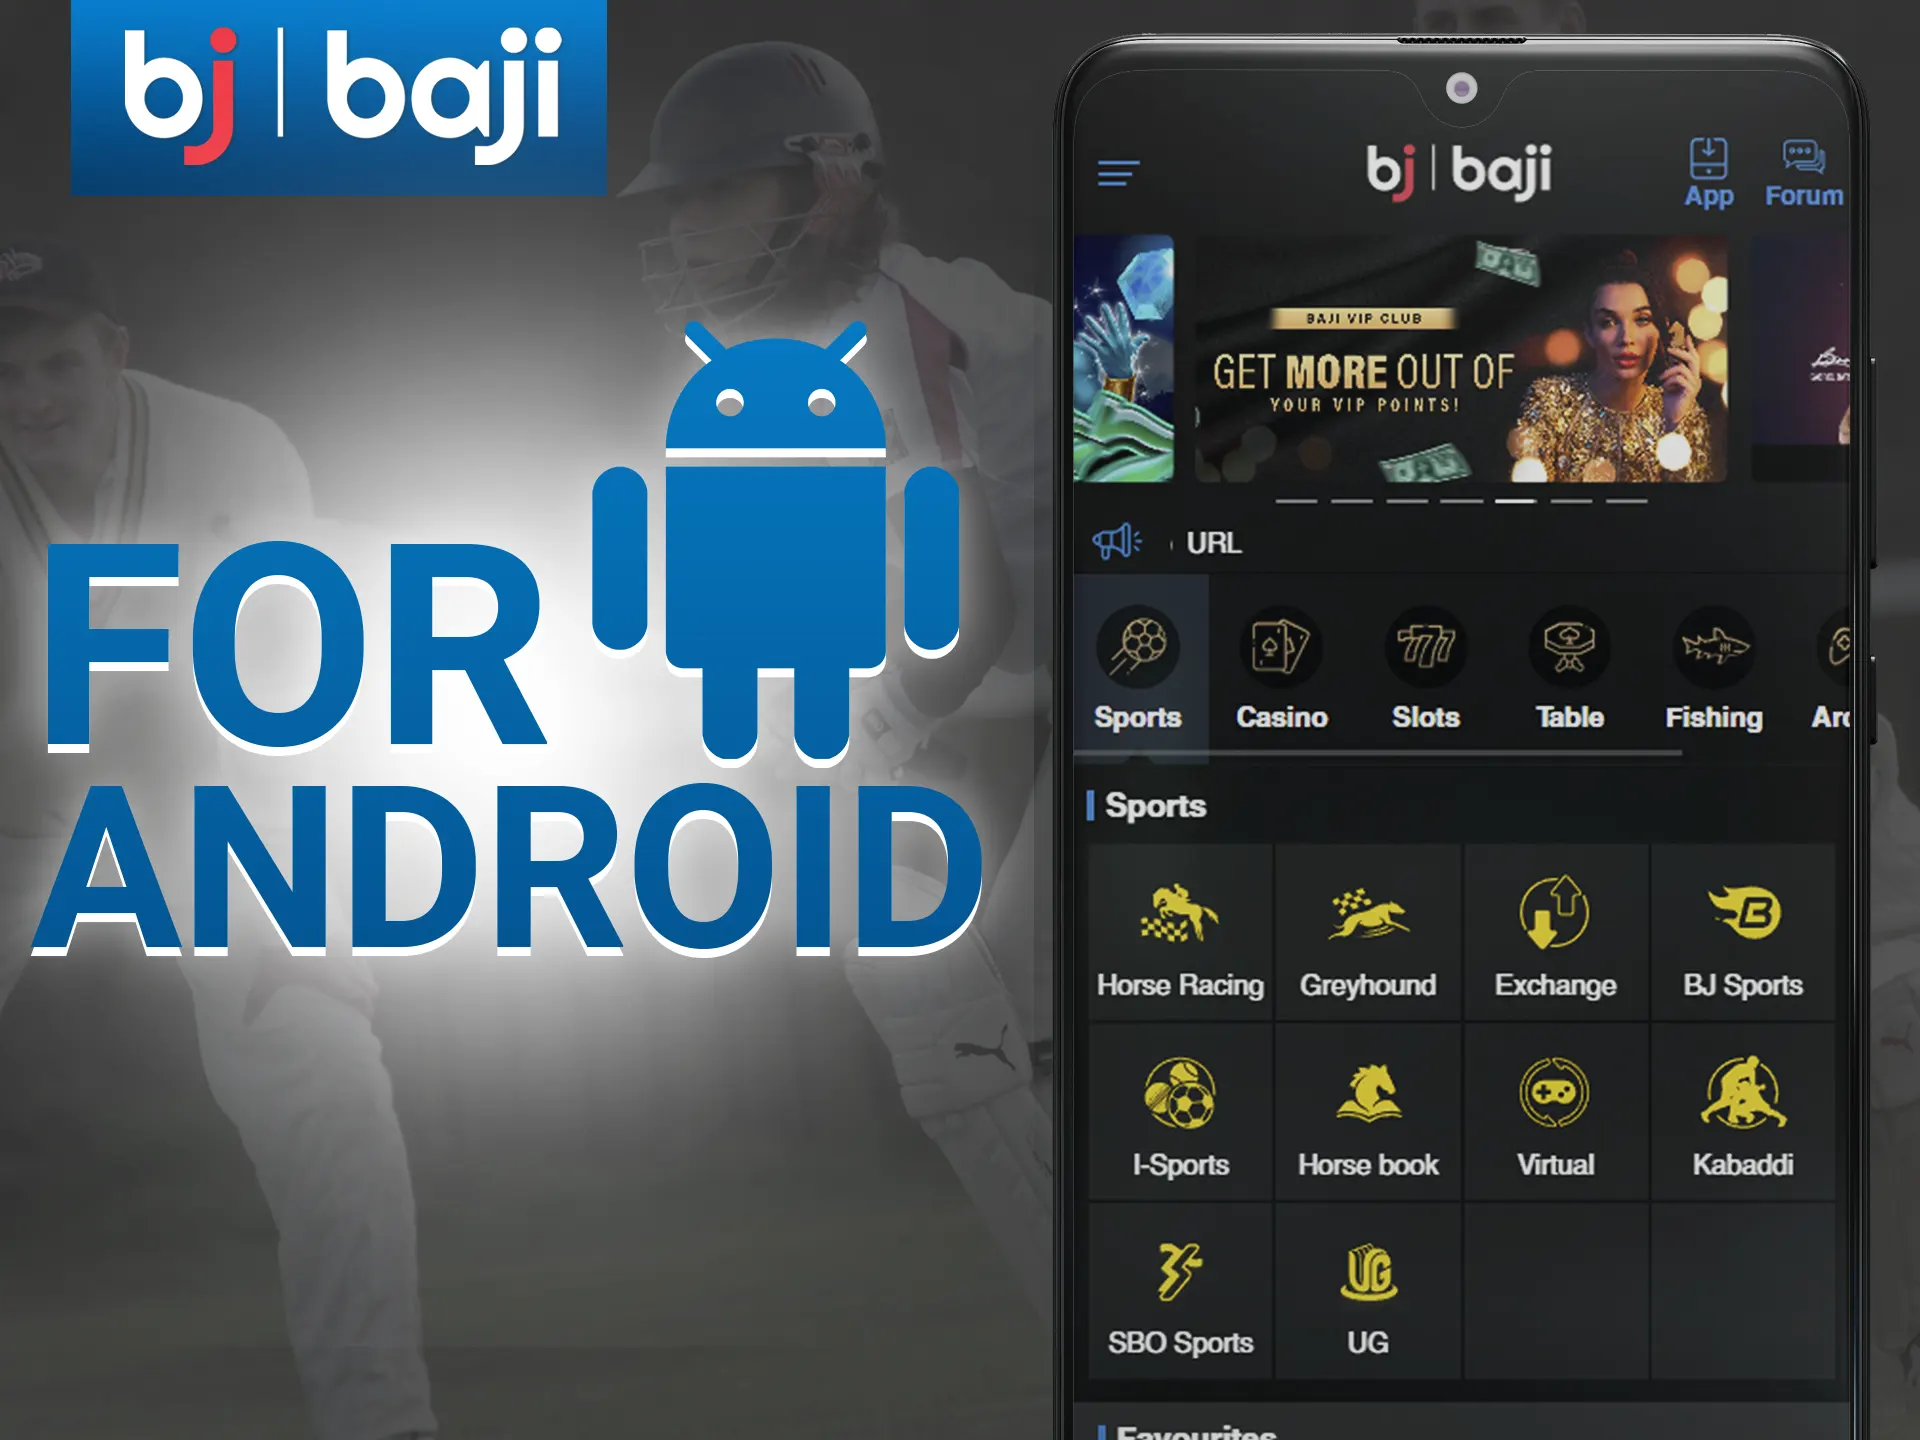 Install the Android app to enjoy all the features of online betting and gambling with Baji Live.